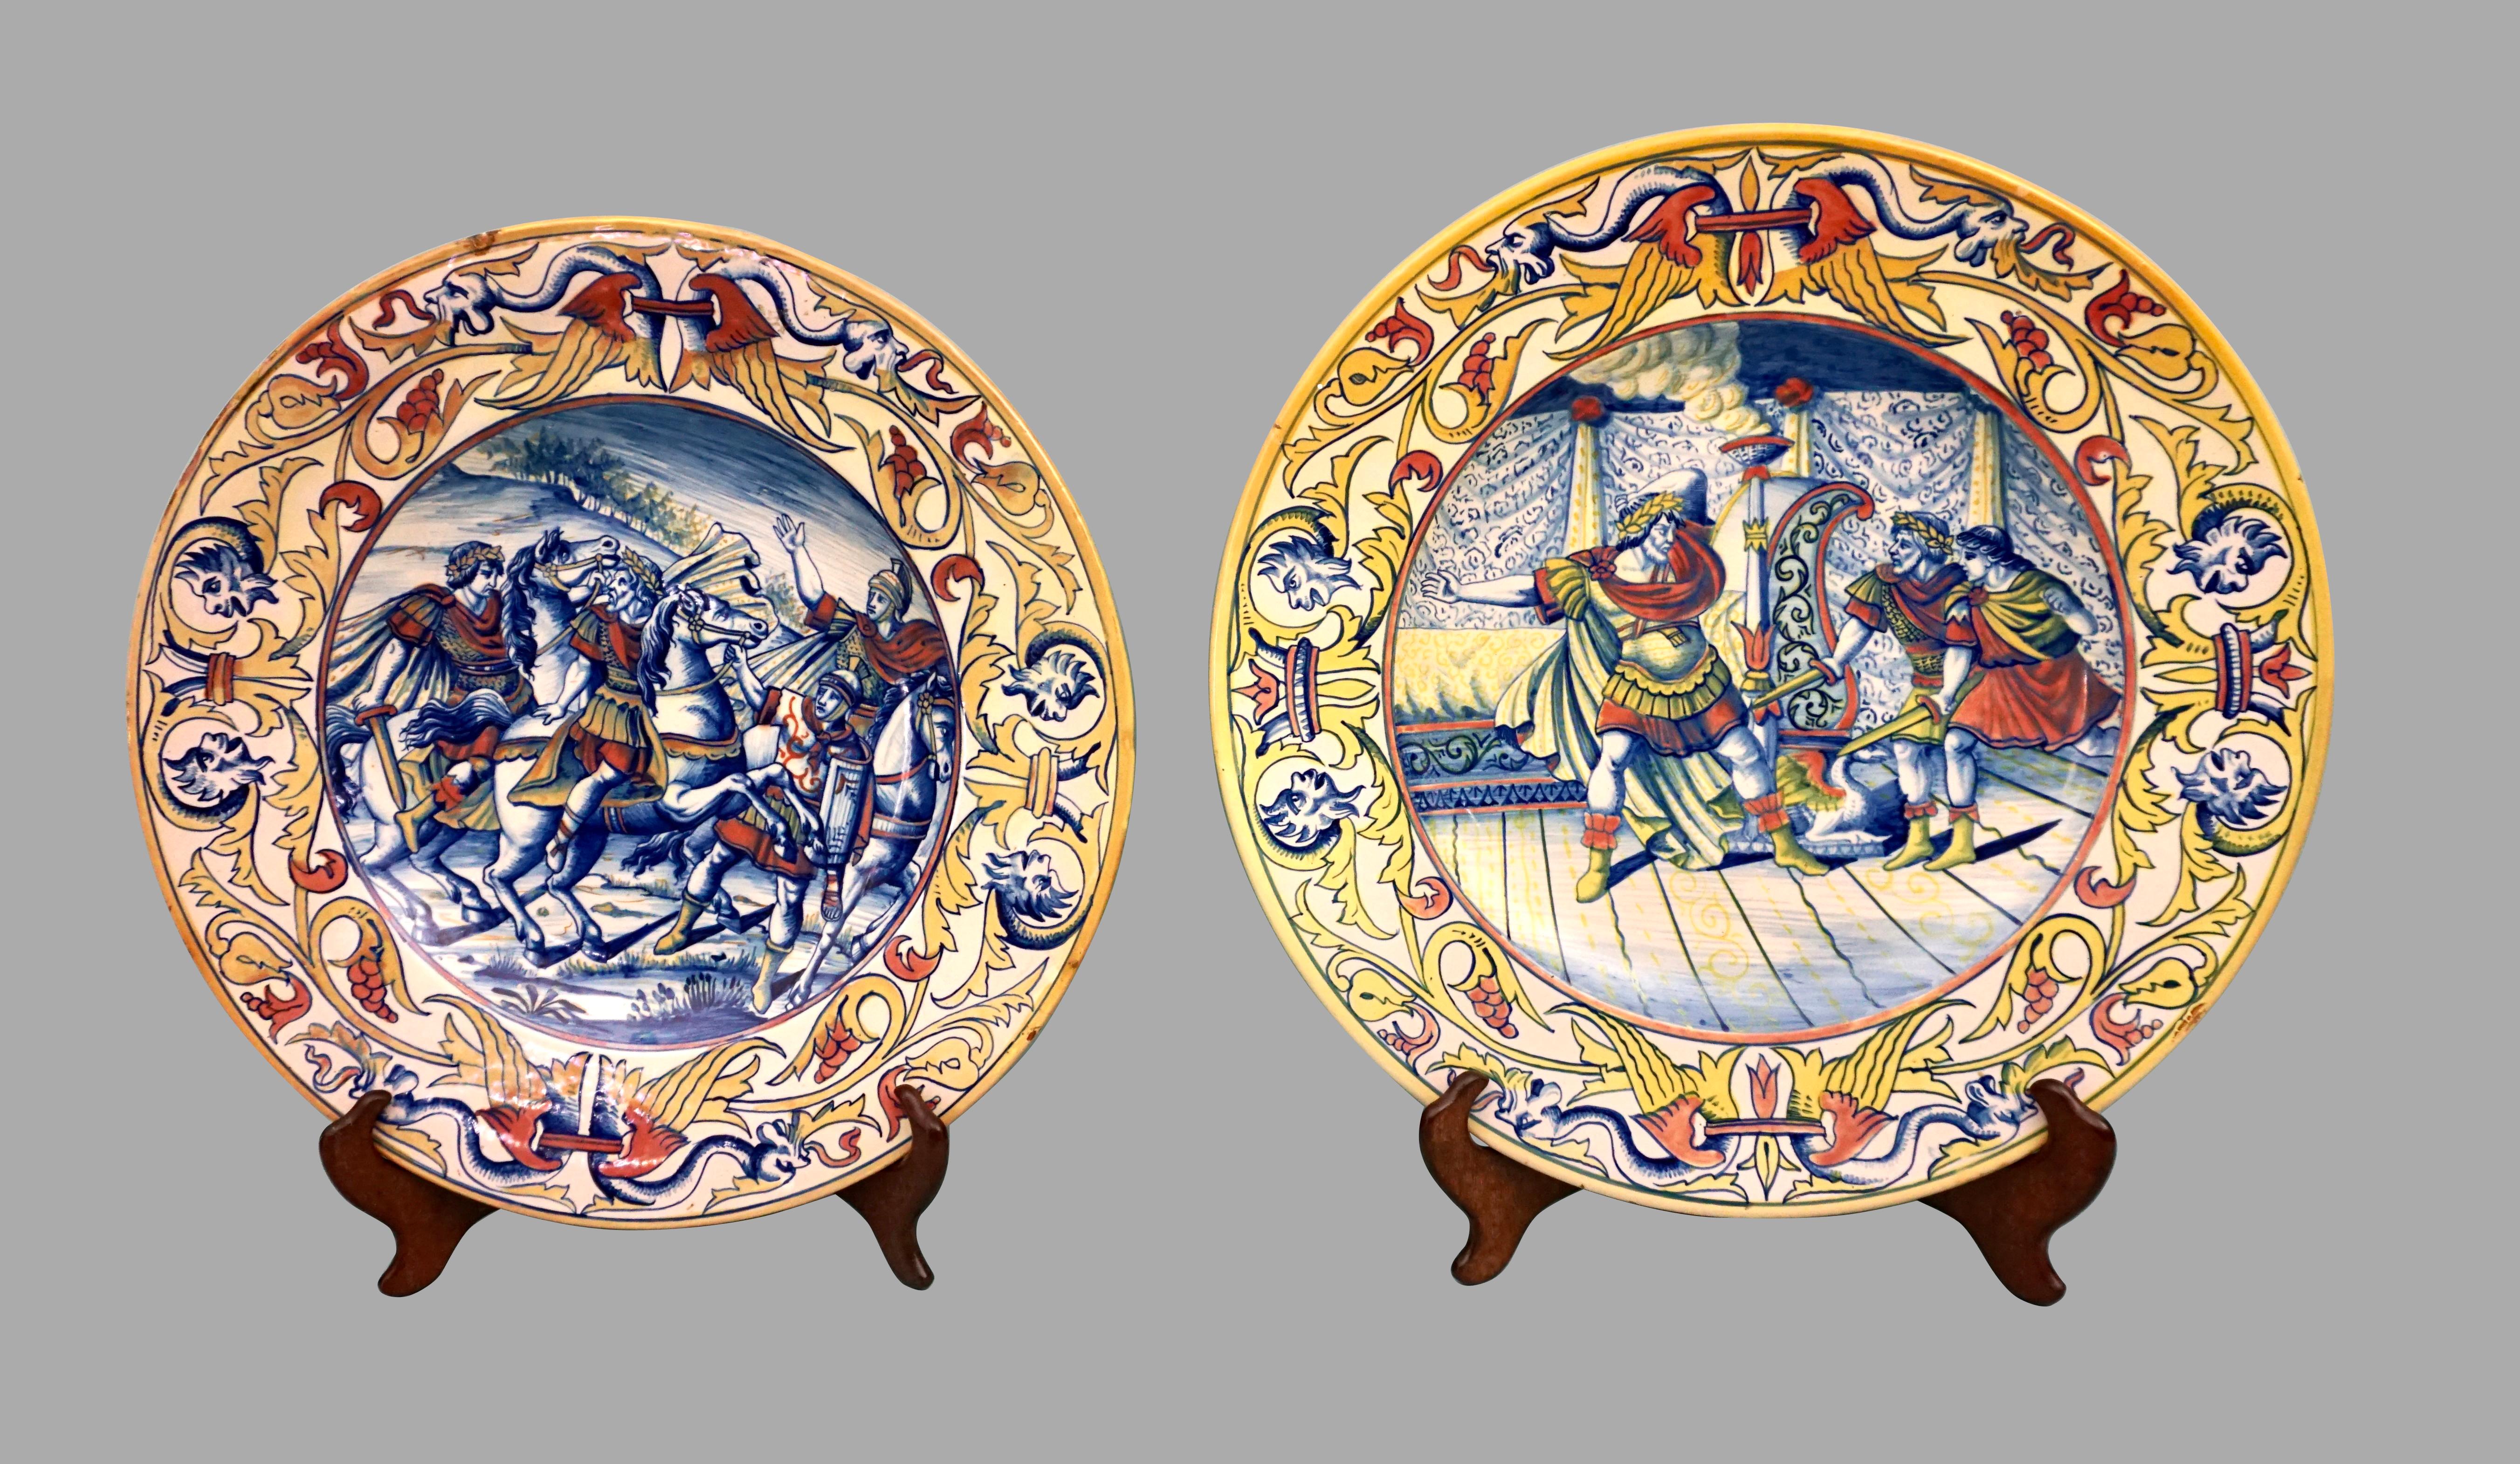 Pair of Italian Maiolica Chargers Depicting Roman Warriors in Combat For Sale 11